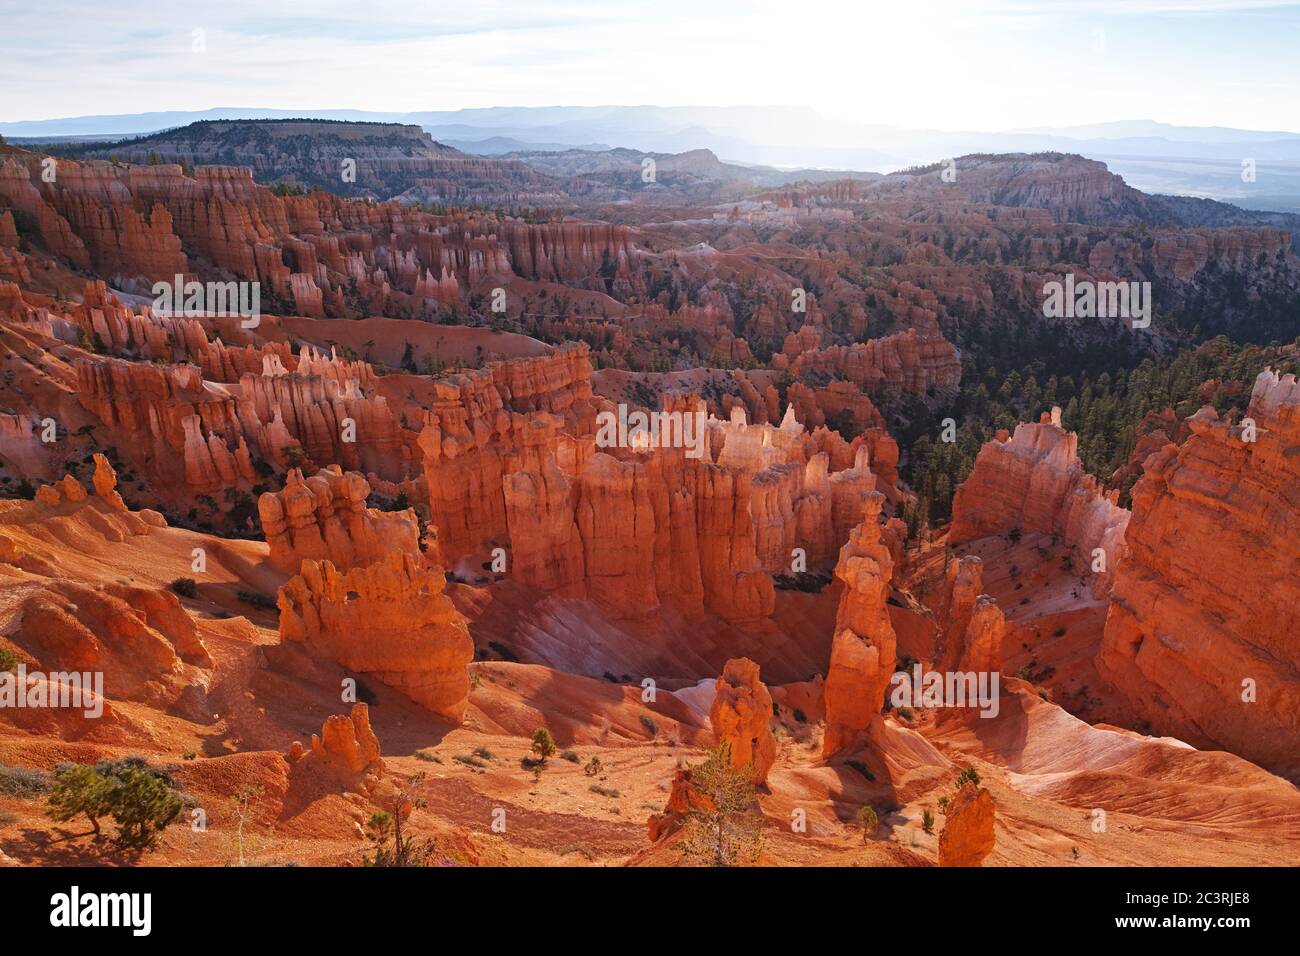 Early morning view of the amphitheater area of Bryce Canyon National Park Stock Photo